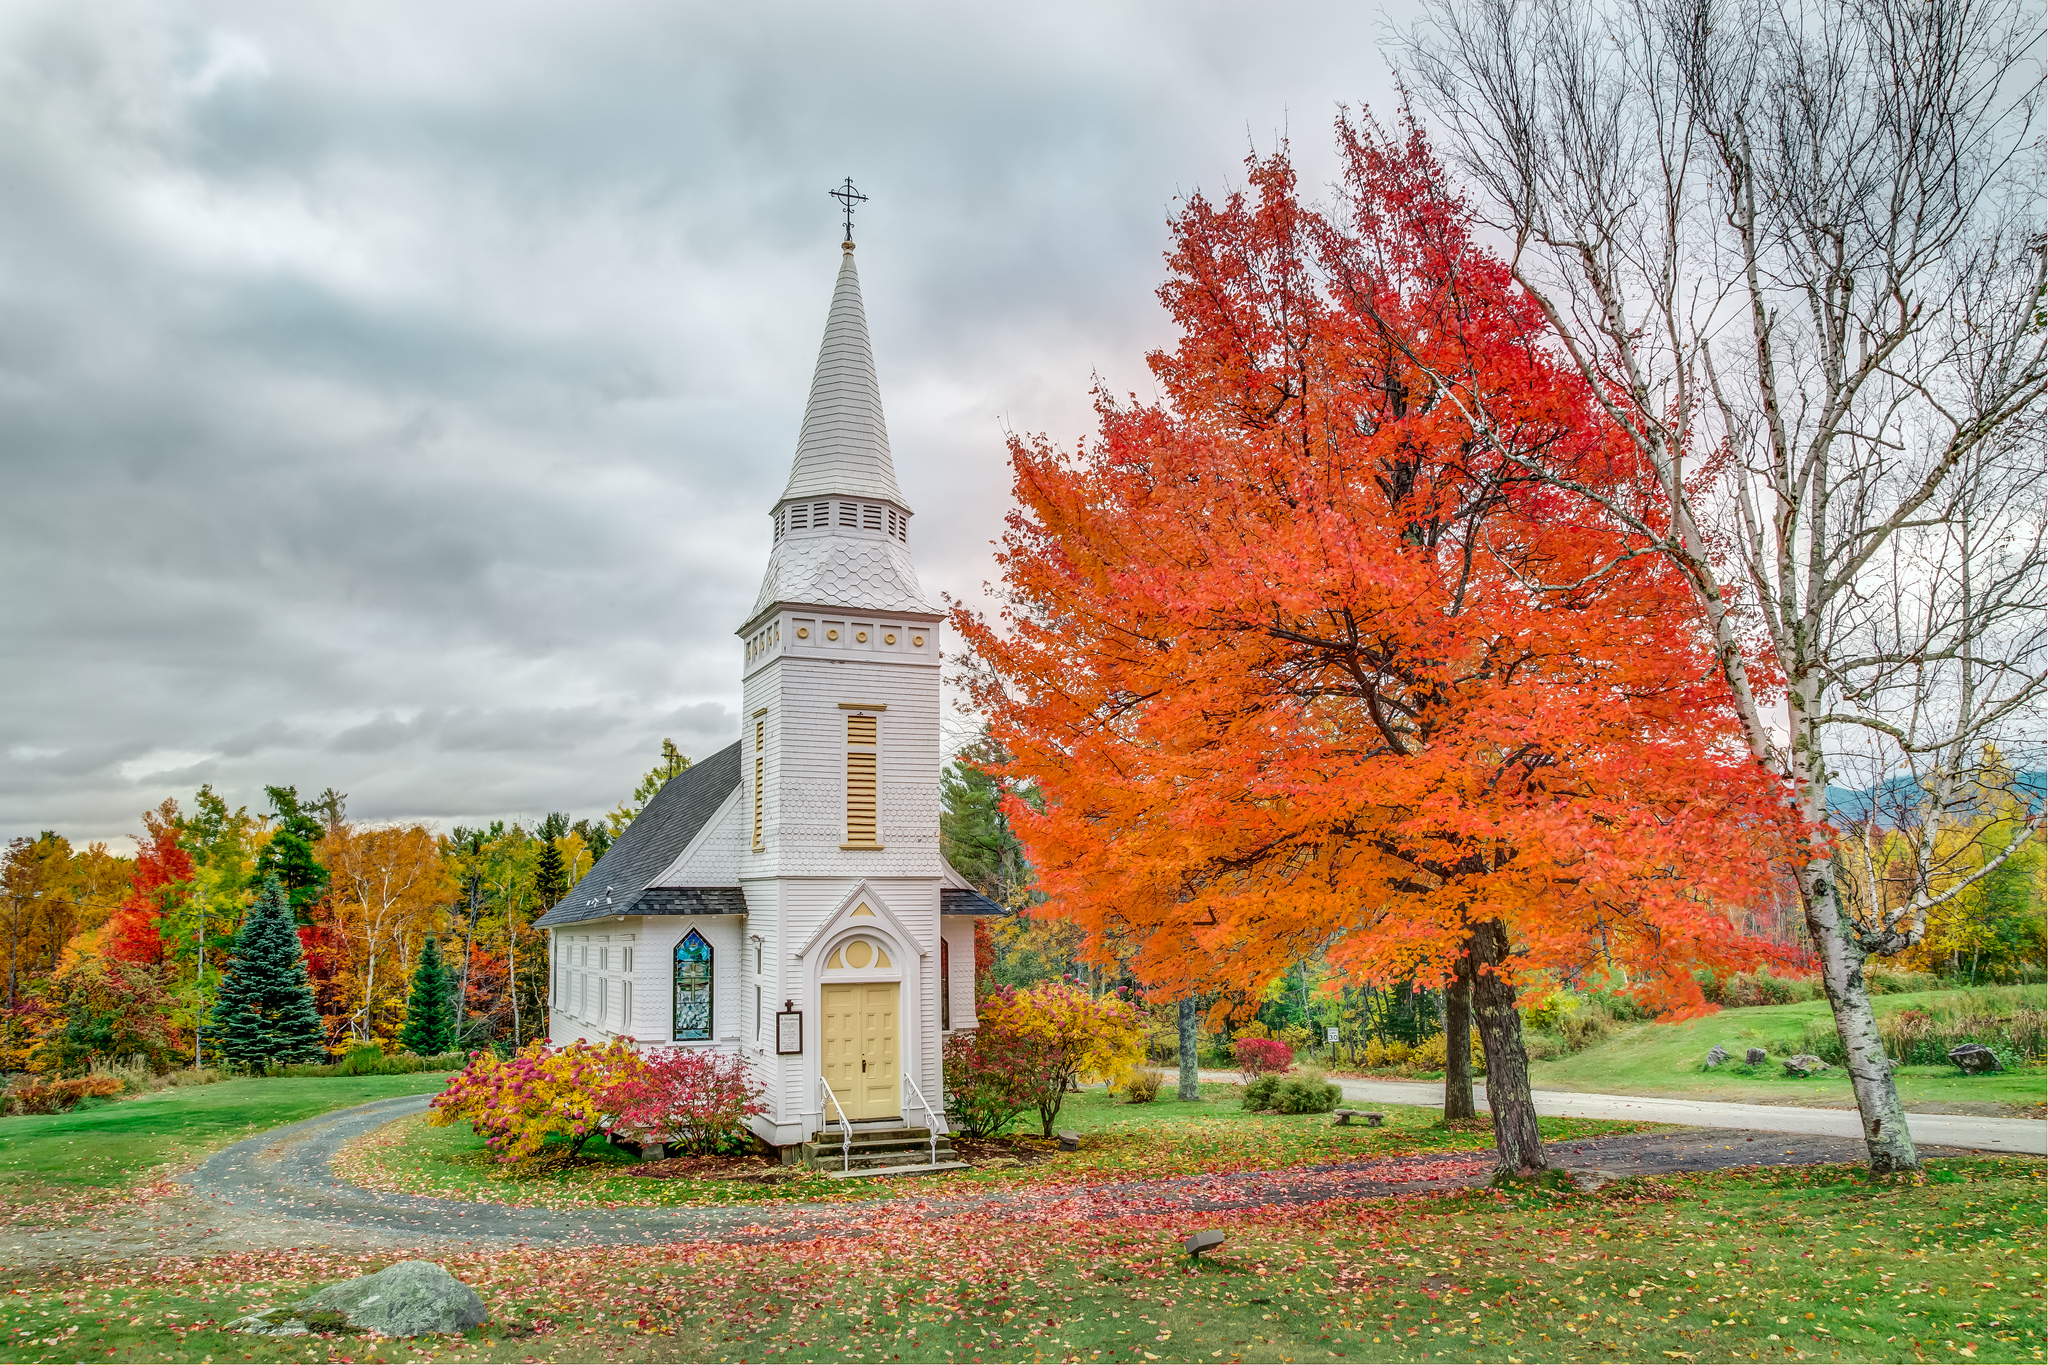 Chapel in Massachusetts in Autumn by davetrono